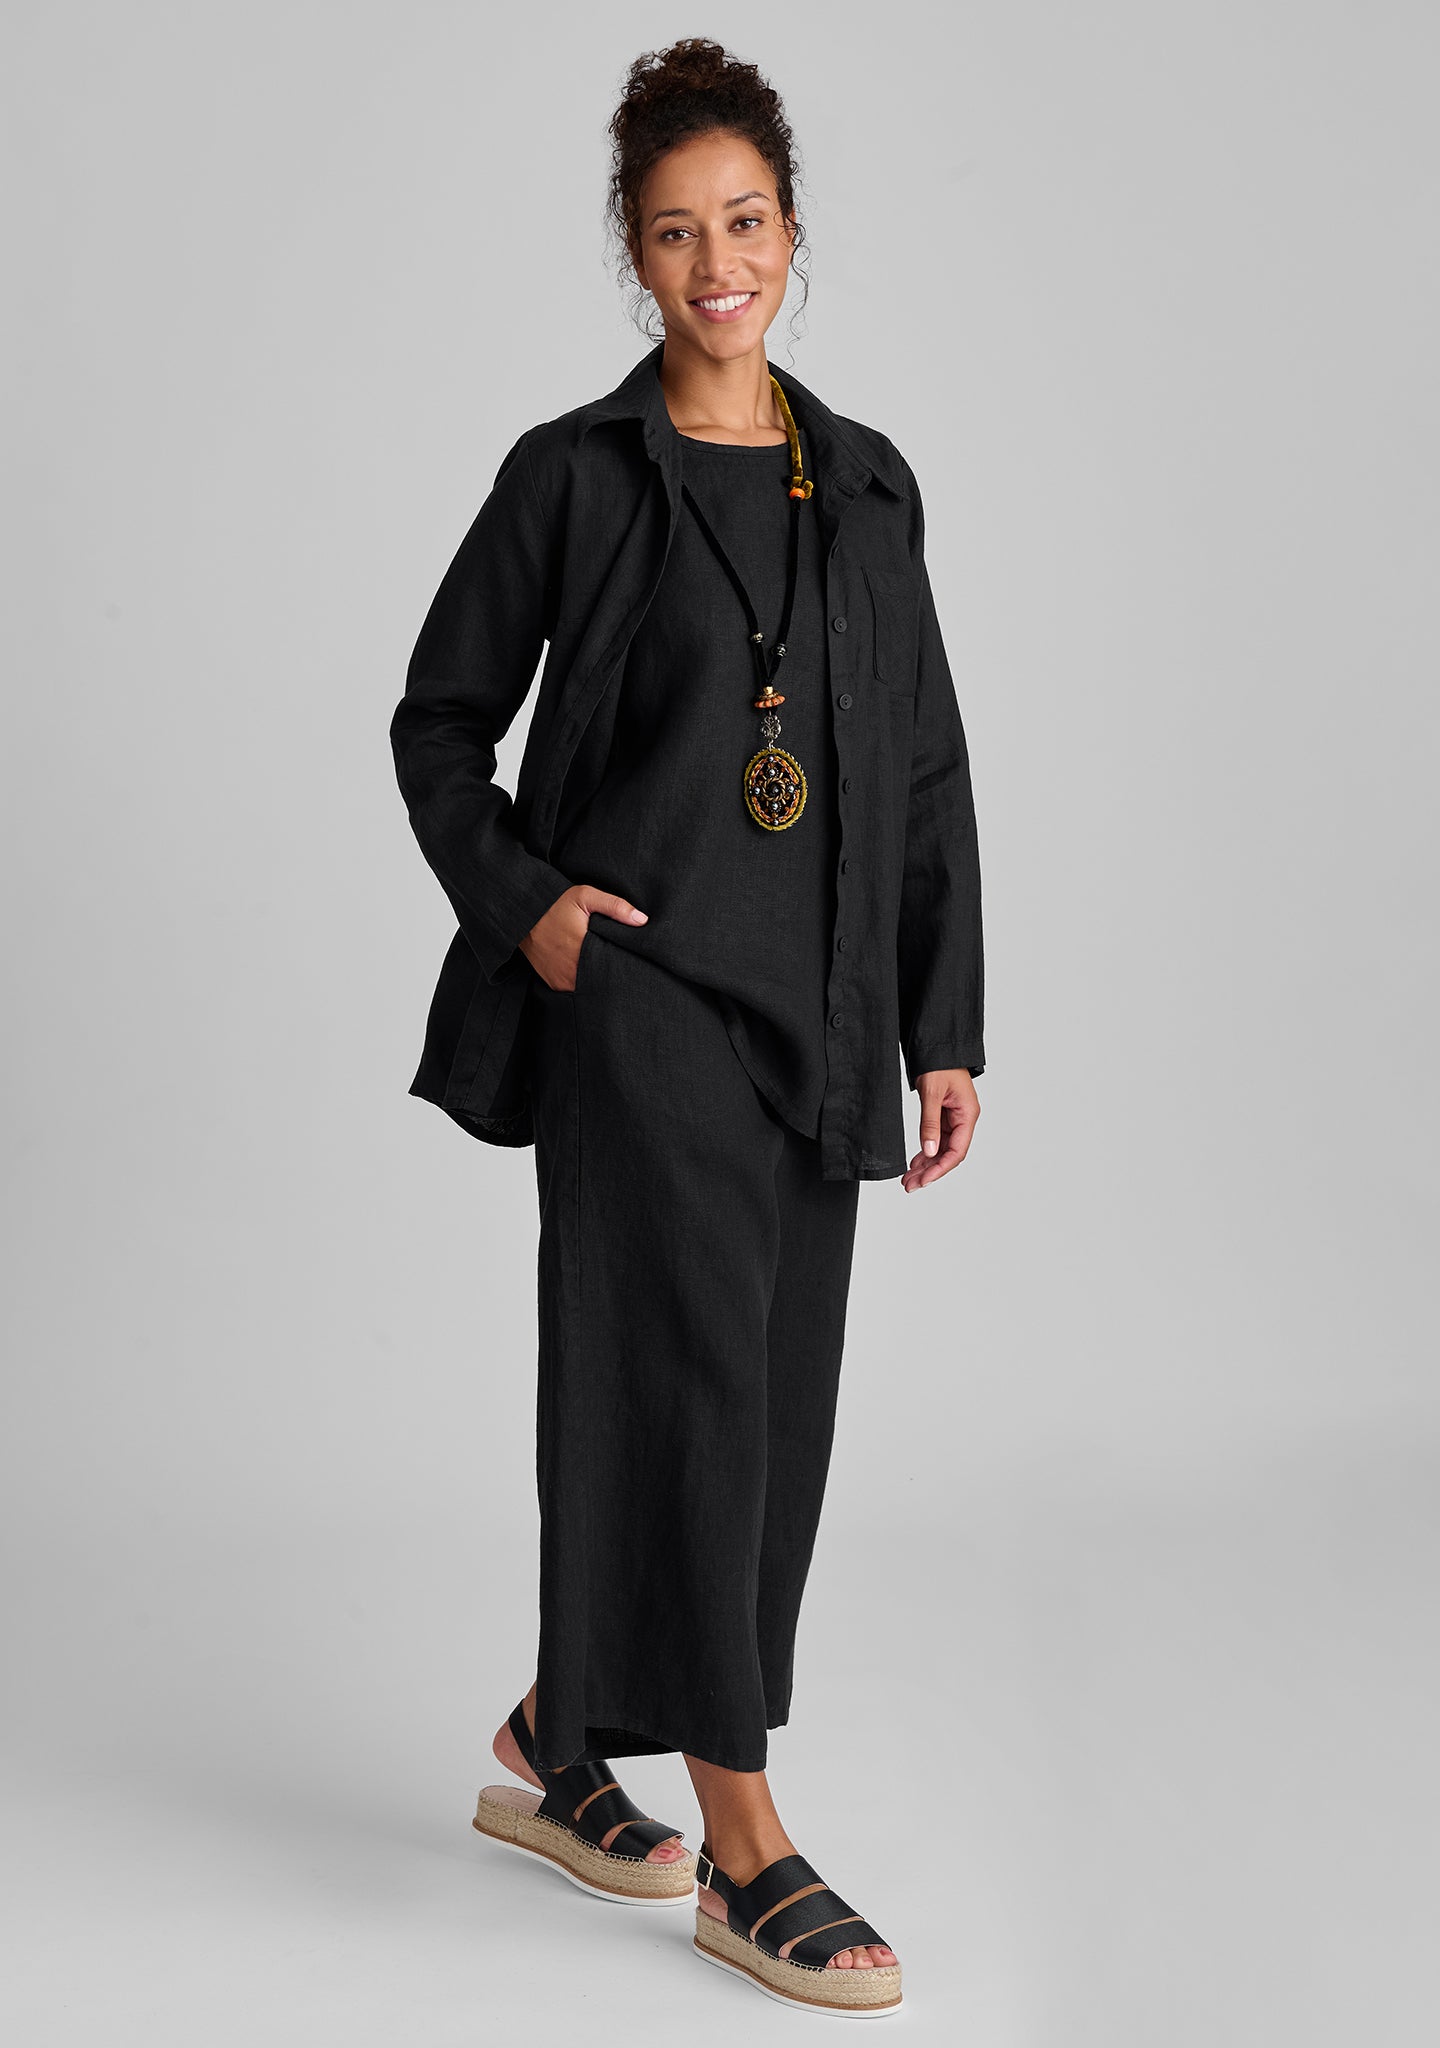 FLAX linen blouse in black with linen tank in black and linen pants in black